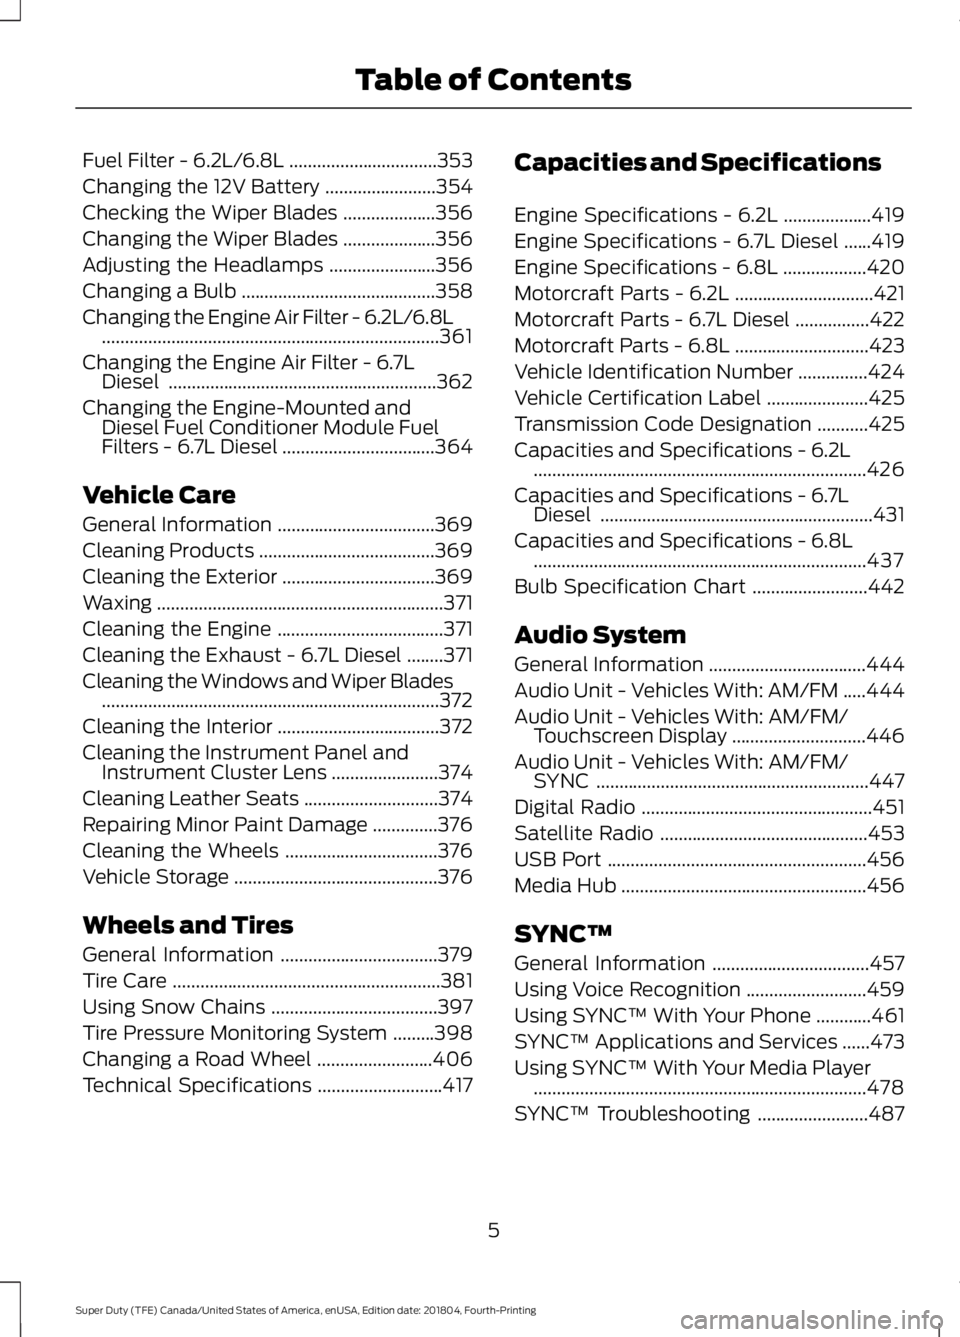 FORD F450 SUPER DUTY 2019  Owners Manual Fuel Filter - 6.2L/6.8L
................................353
Changing the 12V Battery ........................
354
Checking the Wiper Blades ....................
356
Changing the Wiper Blades .........